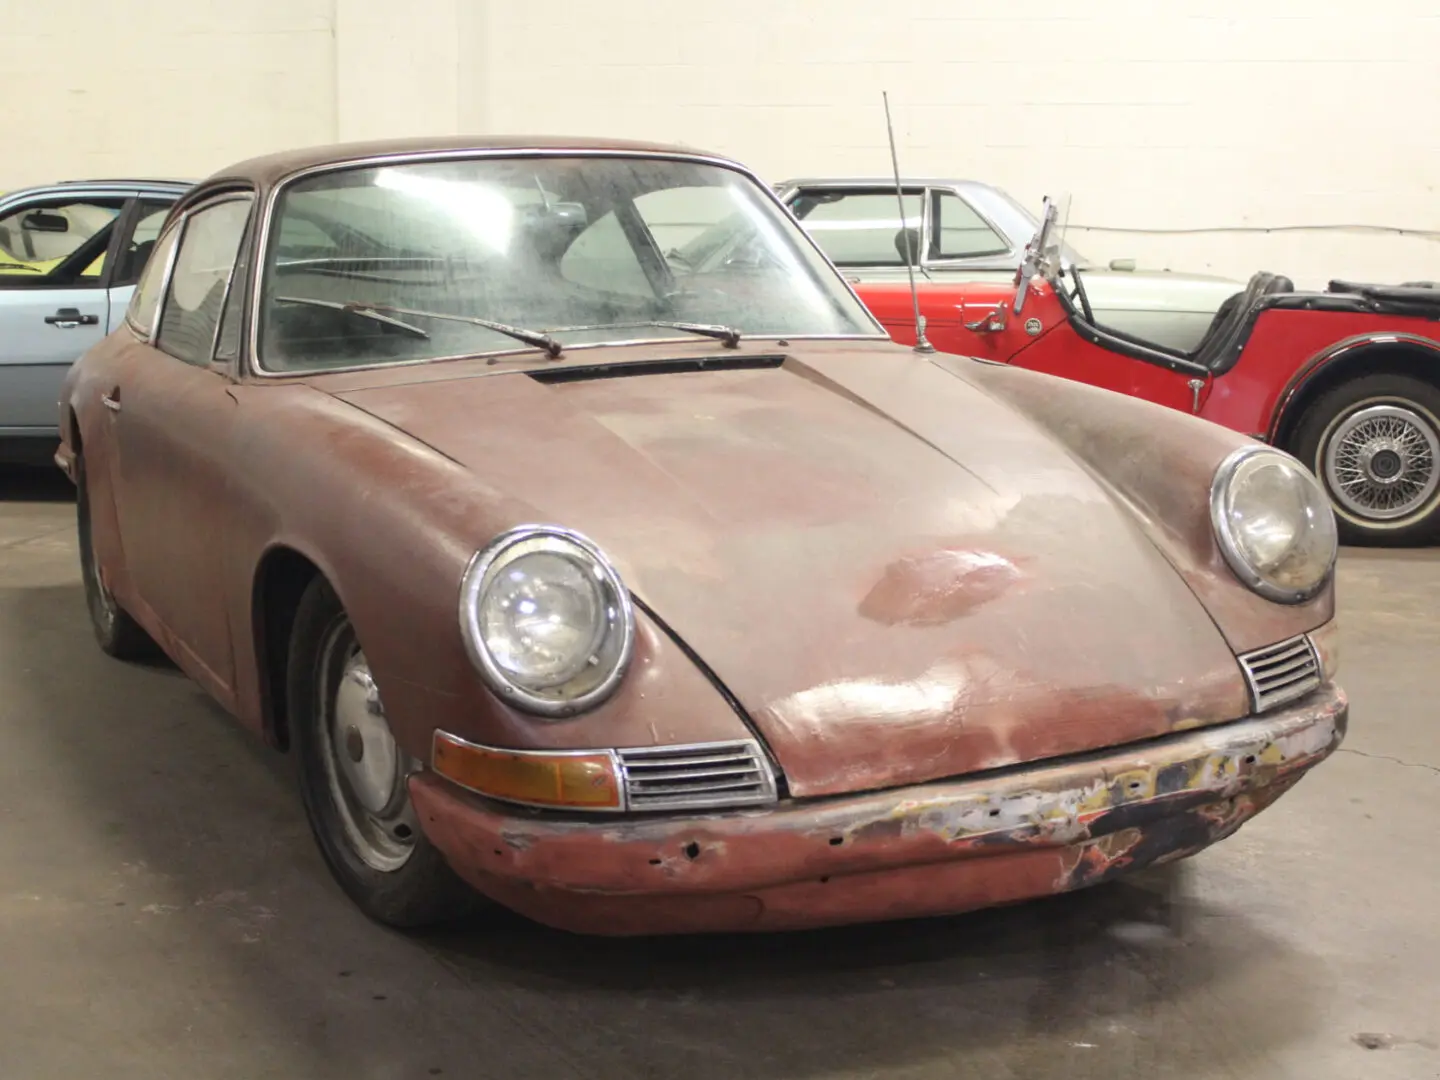 1966 Porsche 912 SWB Coupe, matching numbers car!